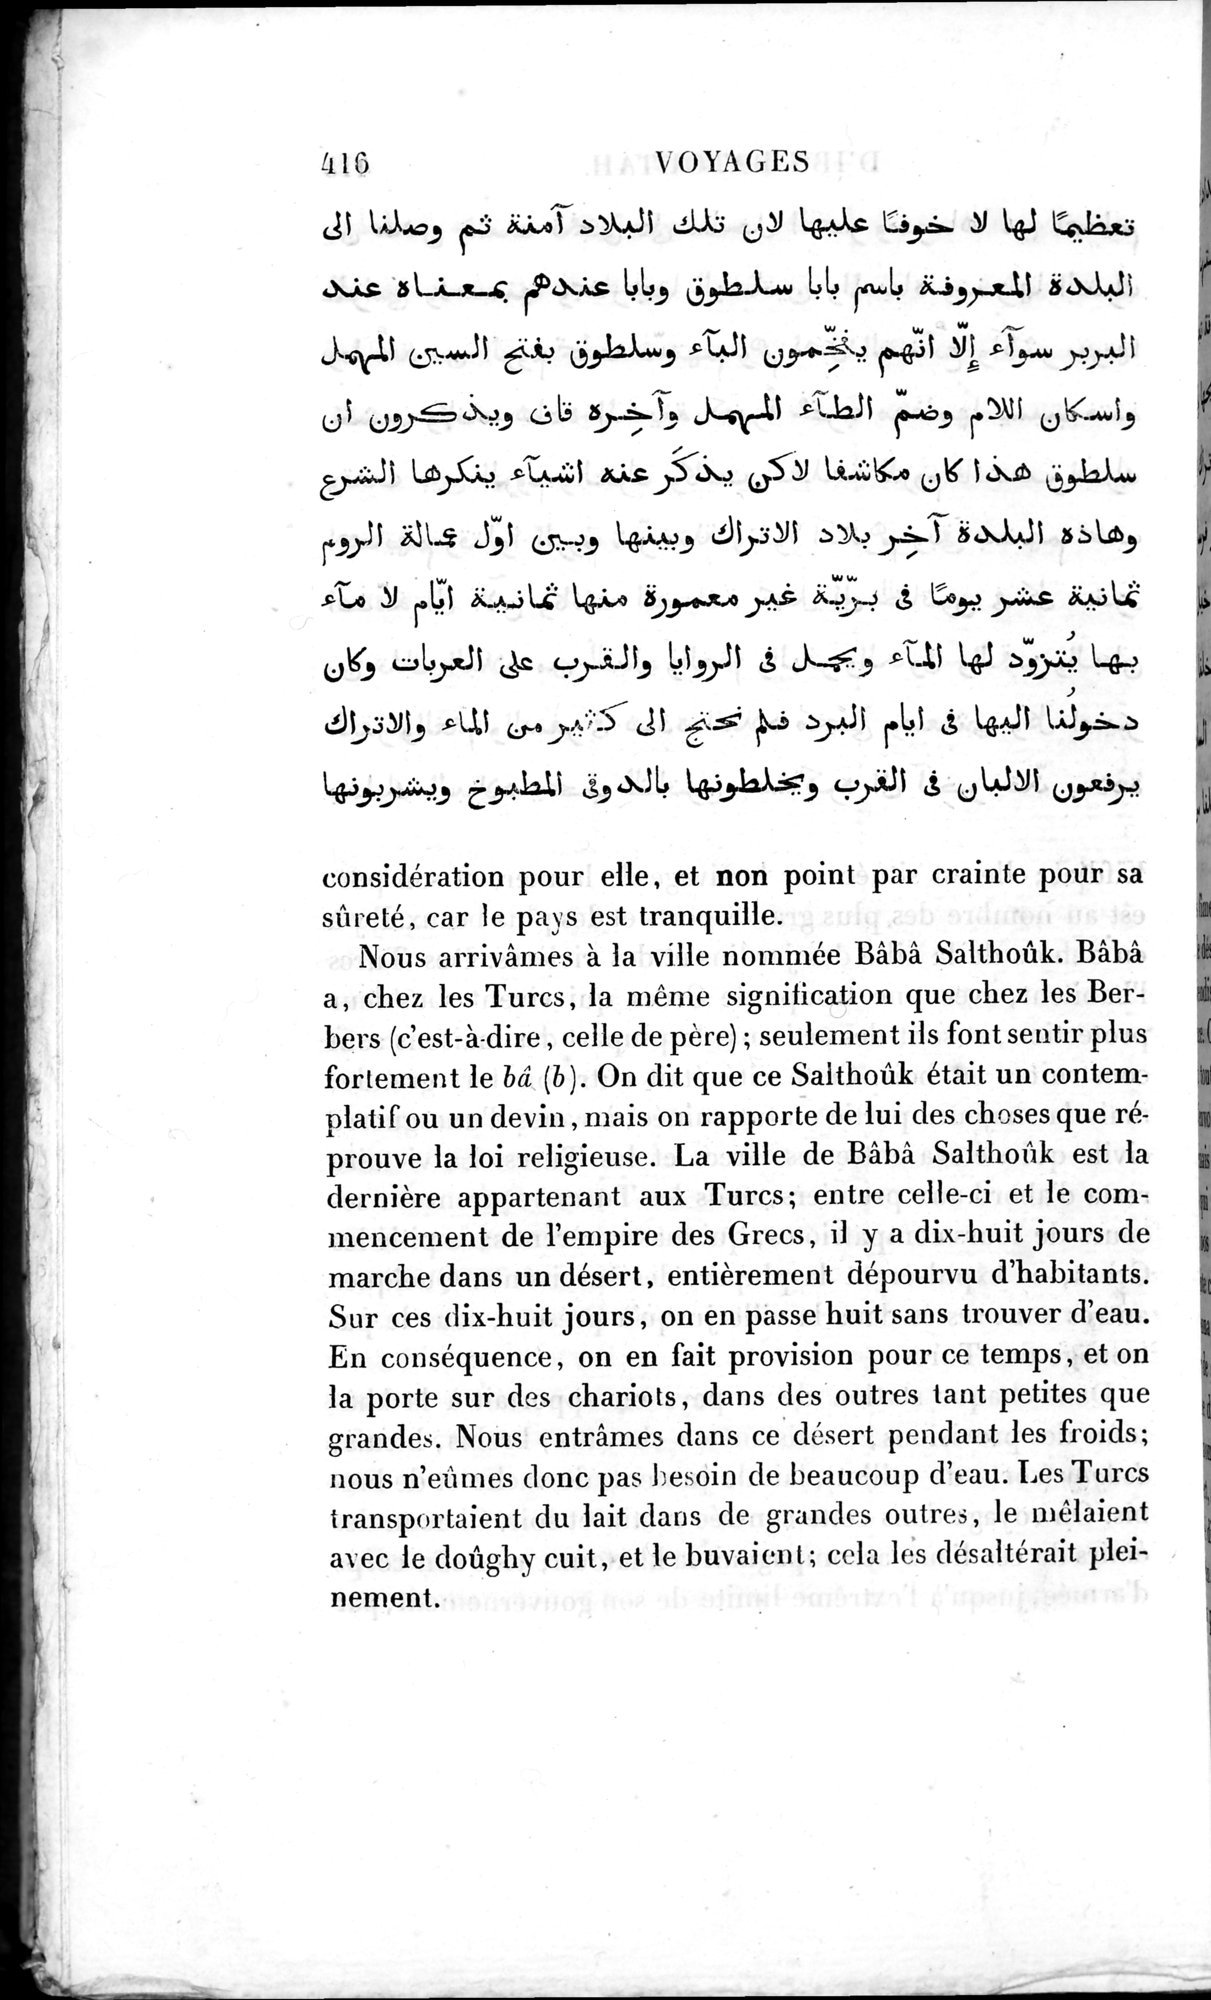 Voyages d'Ibn Batoutah : vol.2 / Page 444 (Grayscale High Resolution Image)